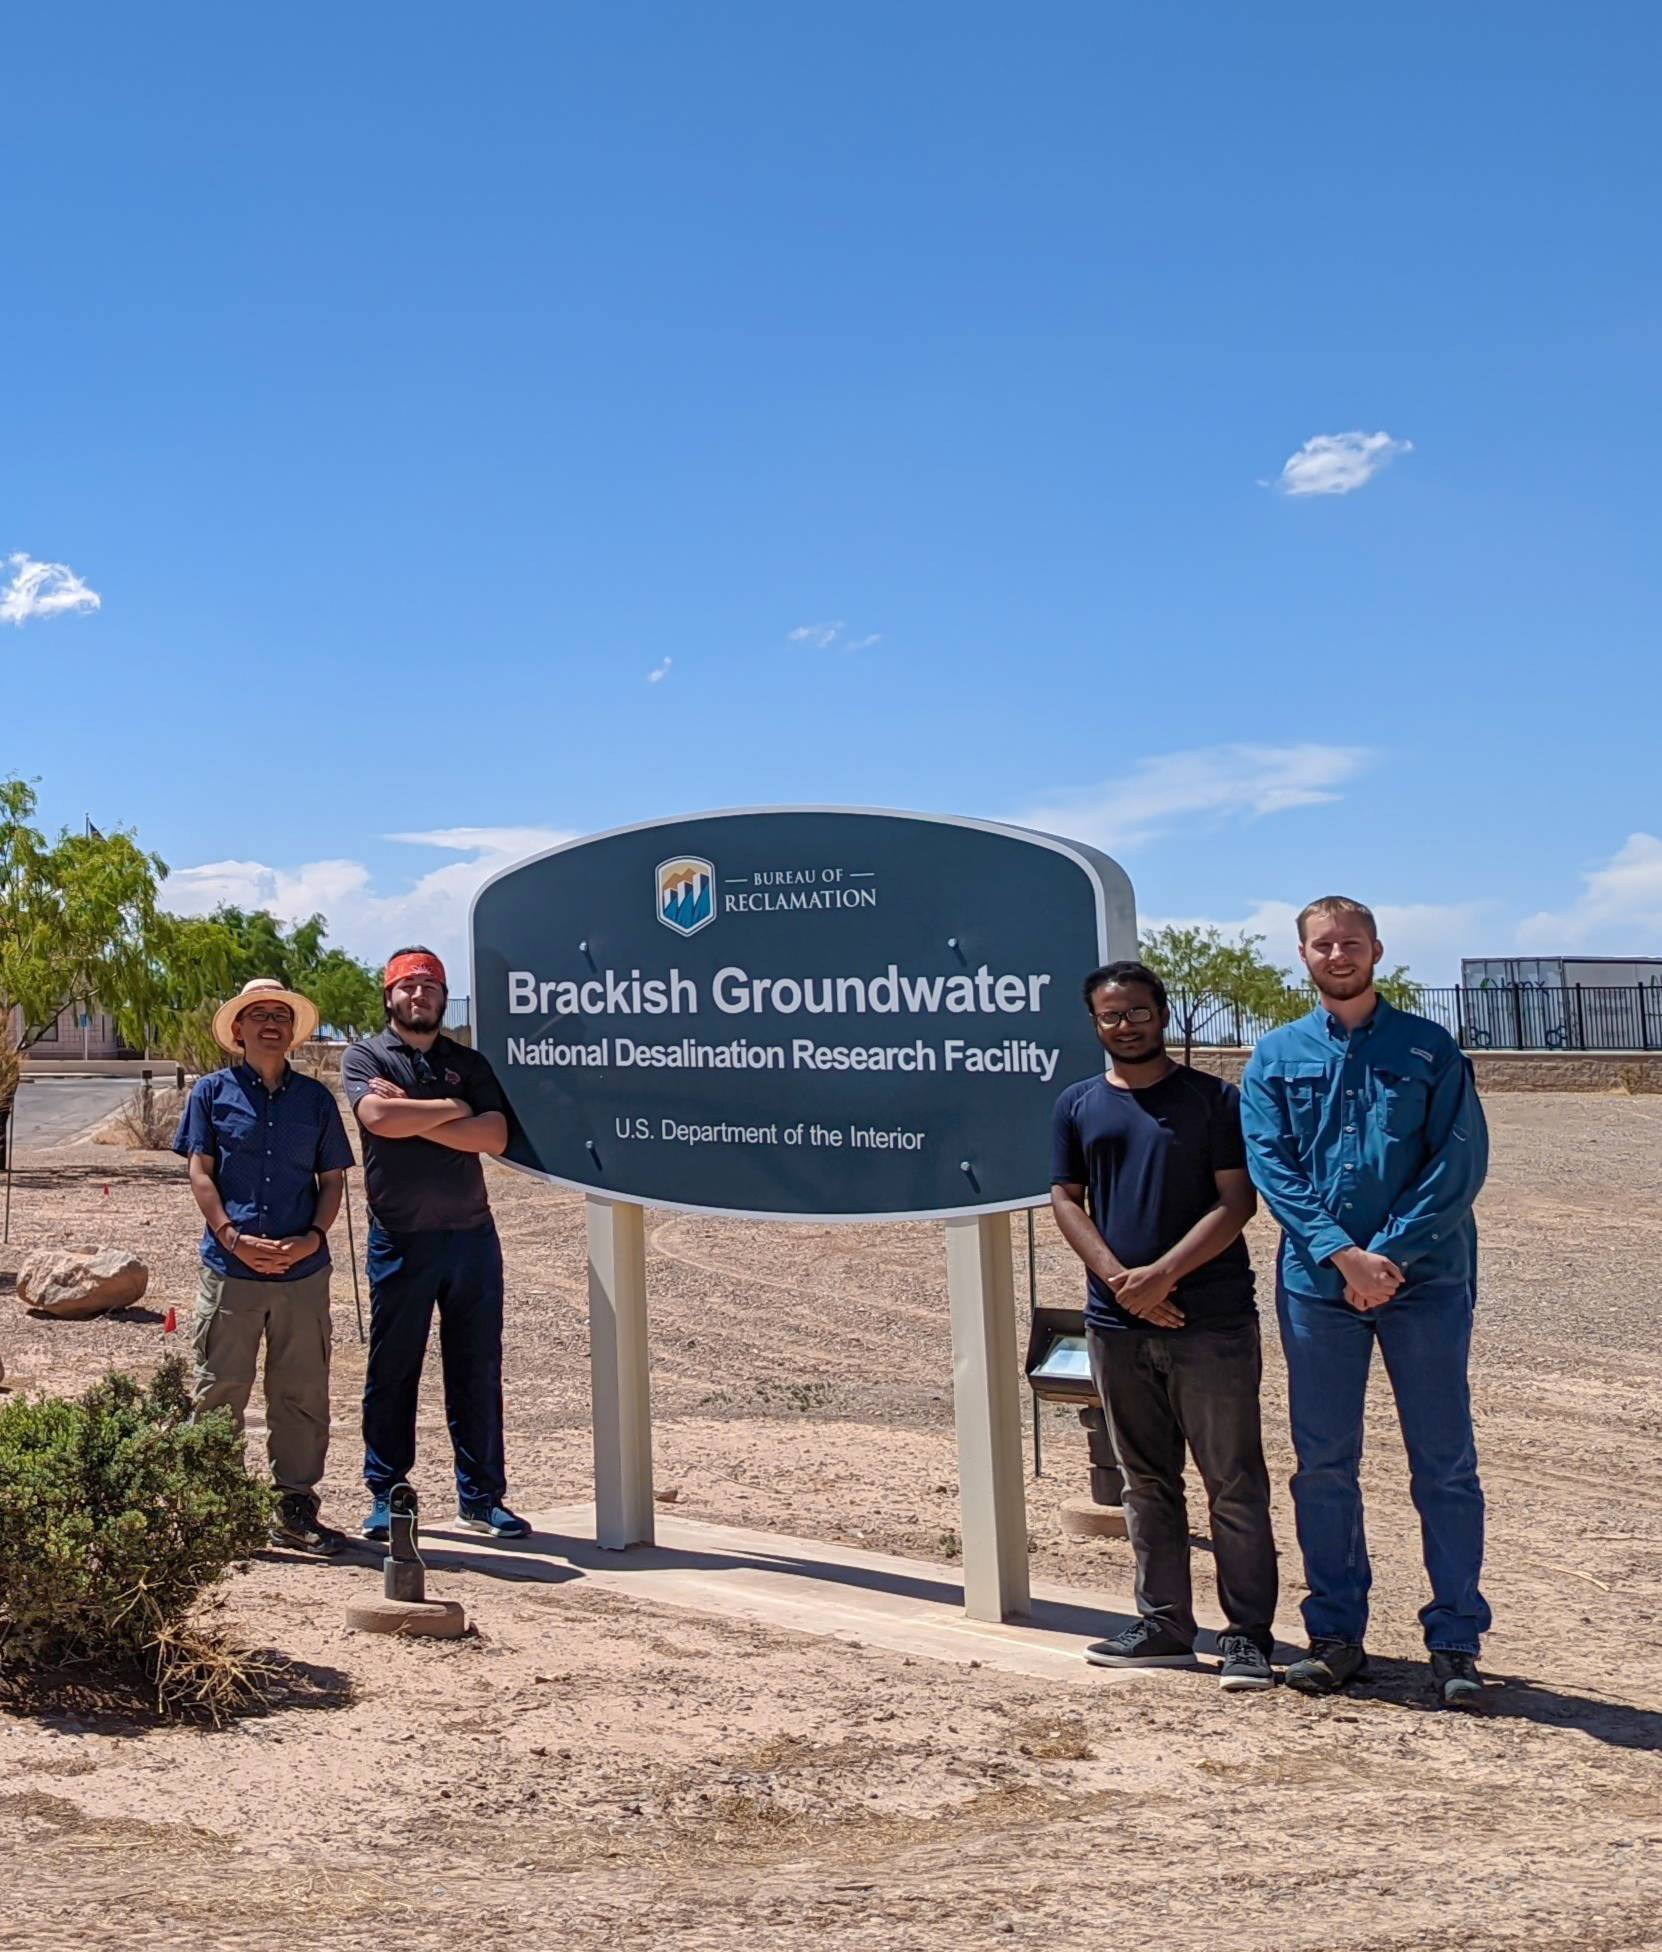 4 people standing in front of Brackish Groundwater Desalination Research Facility in New Mexico